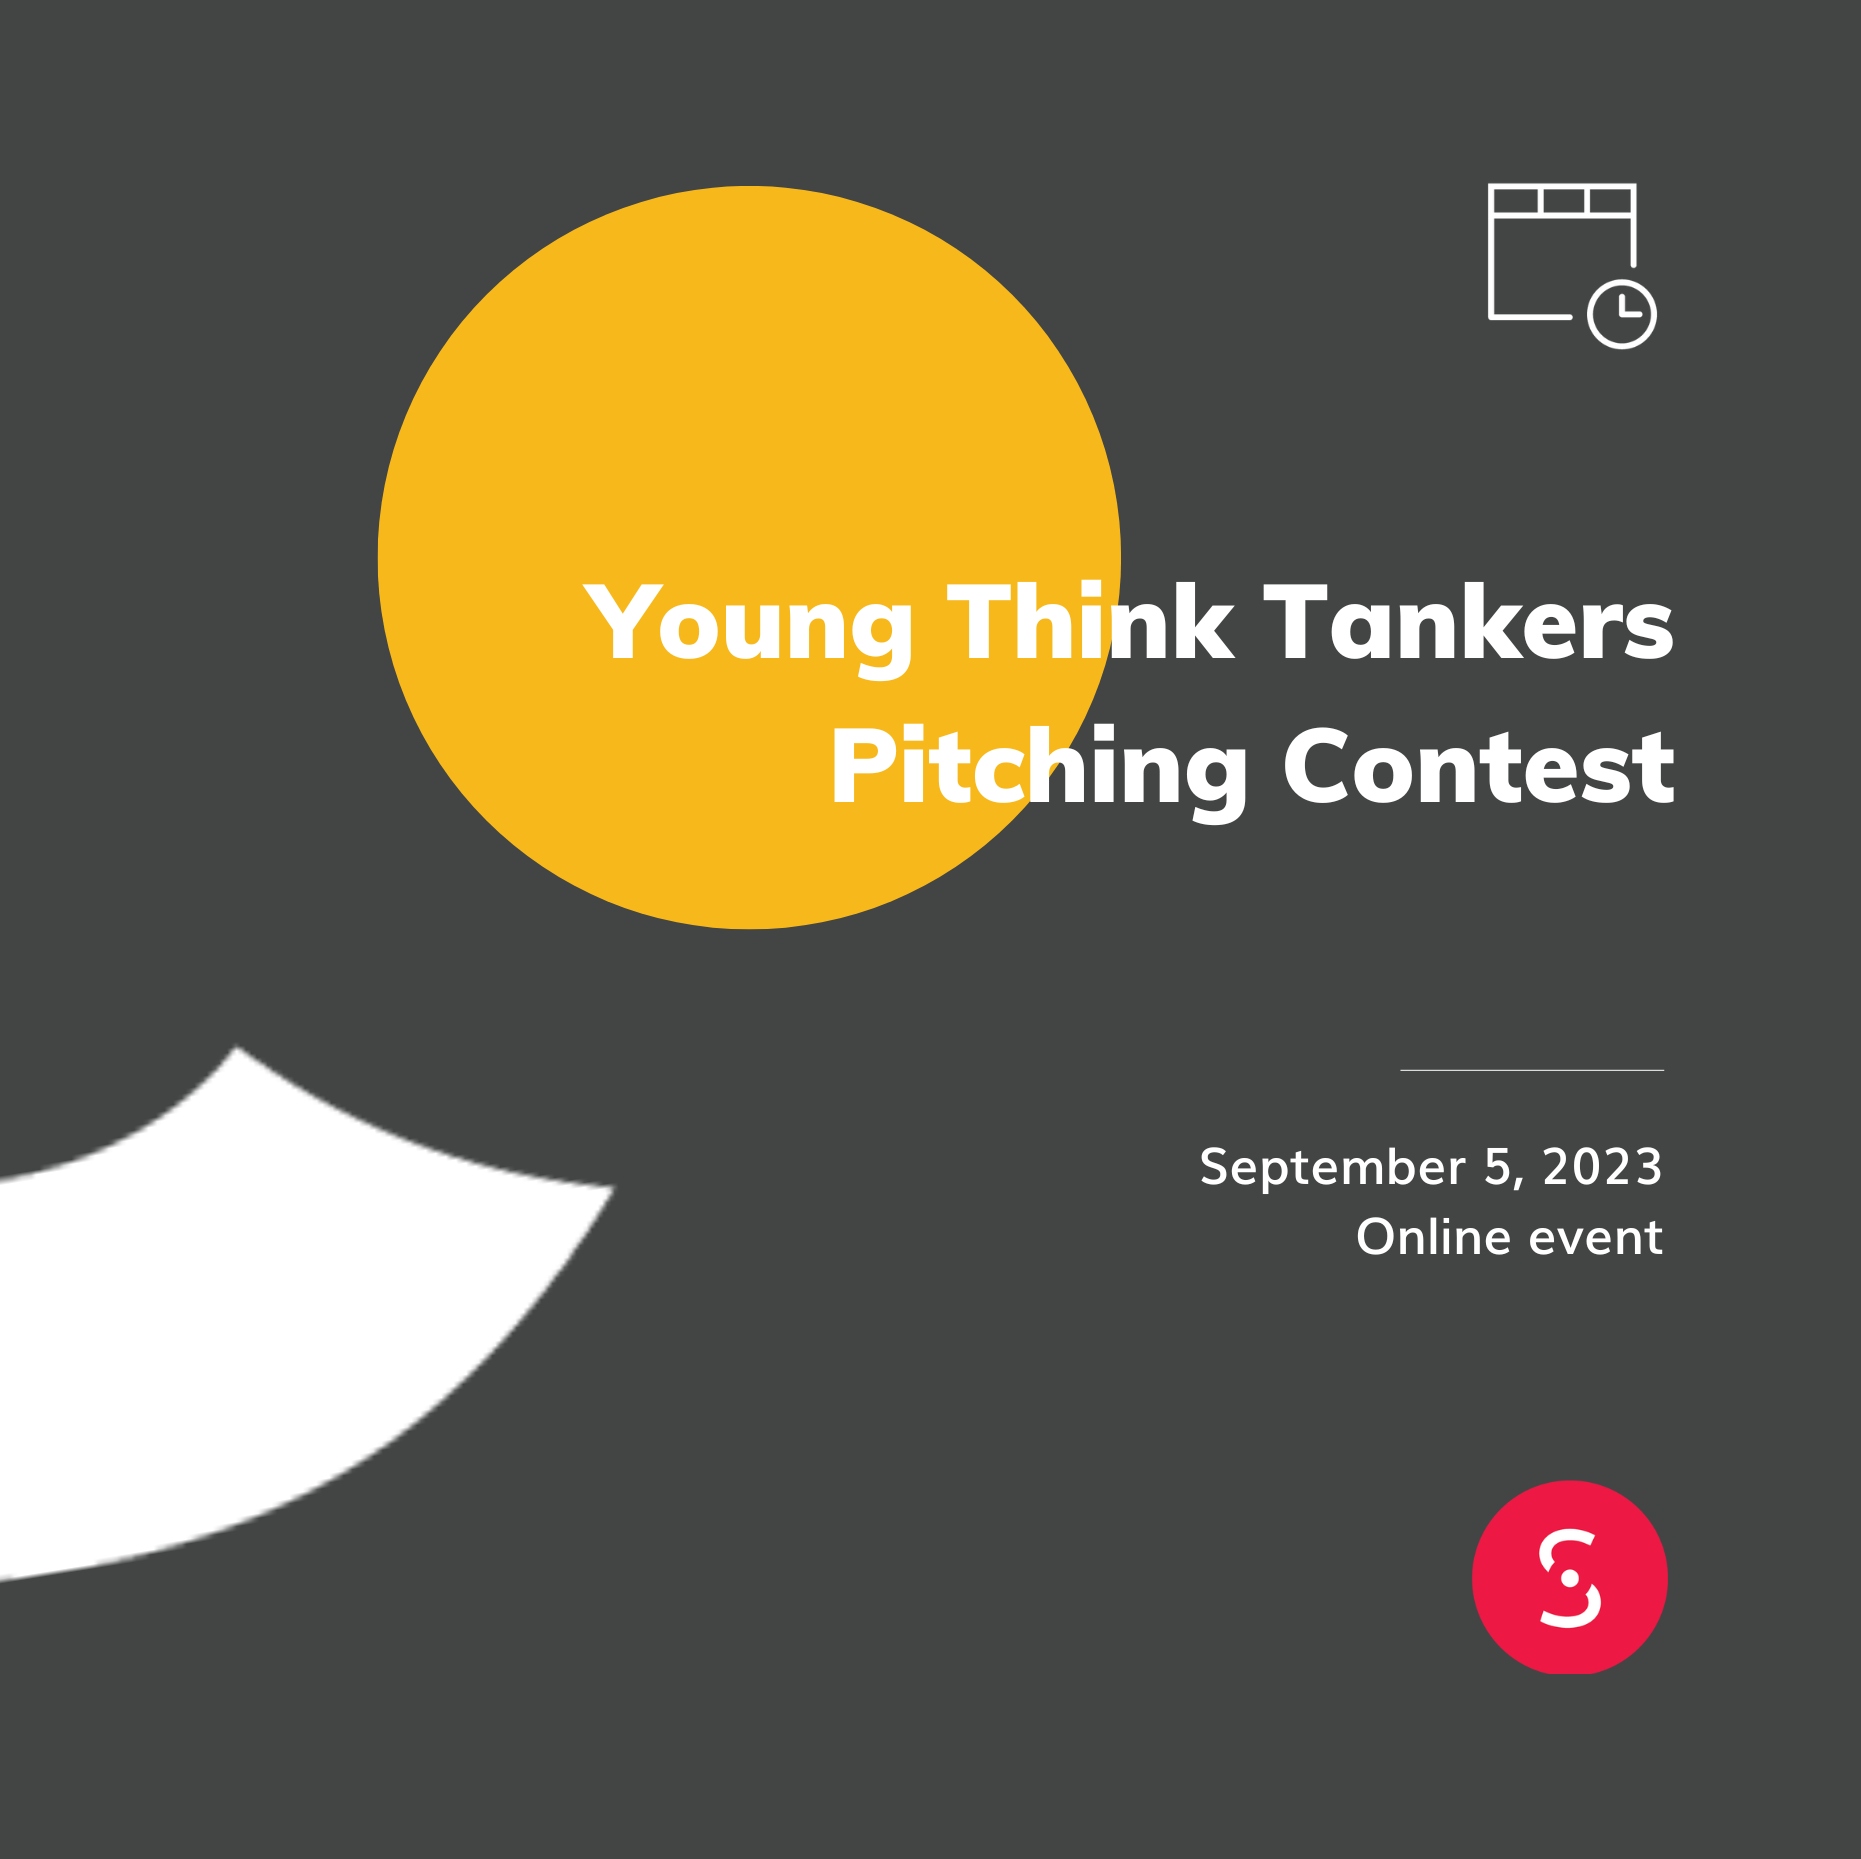 young think tankers pitching contest